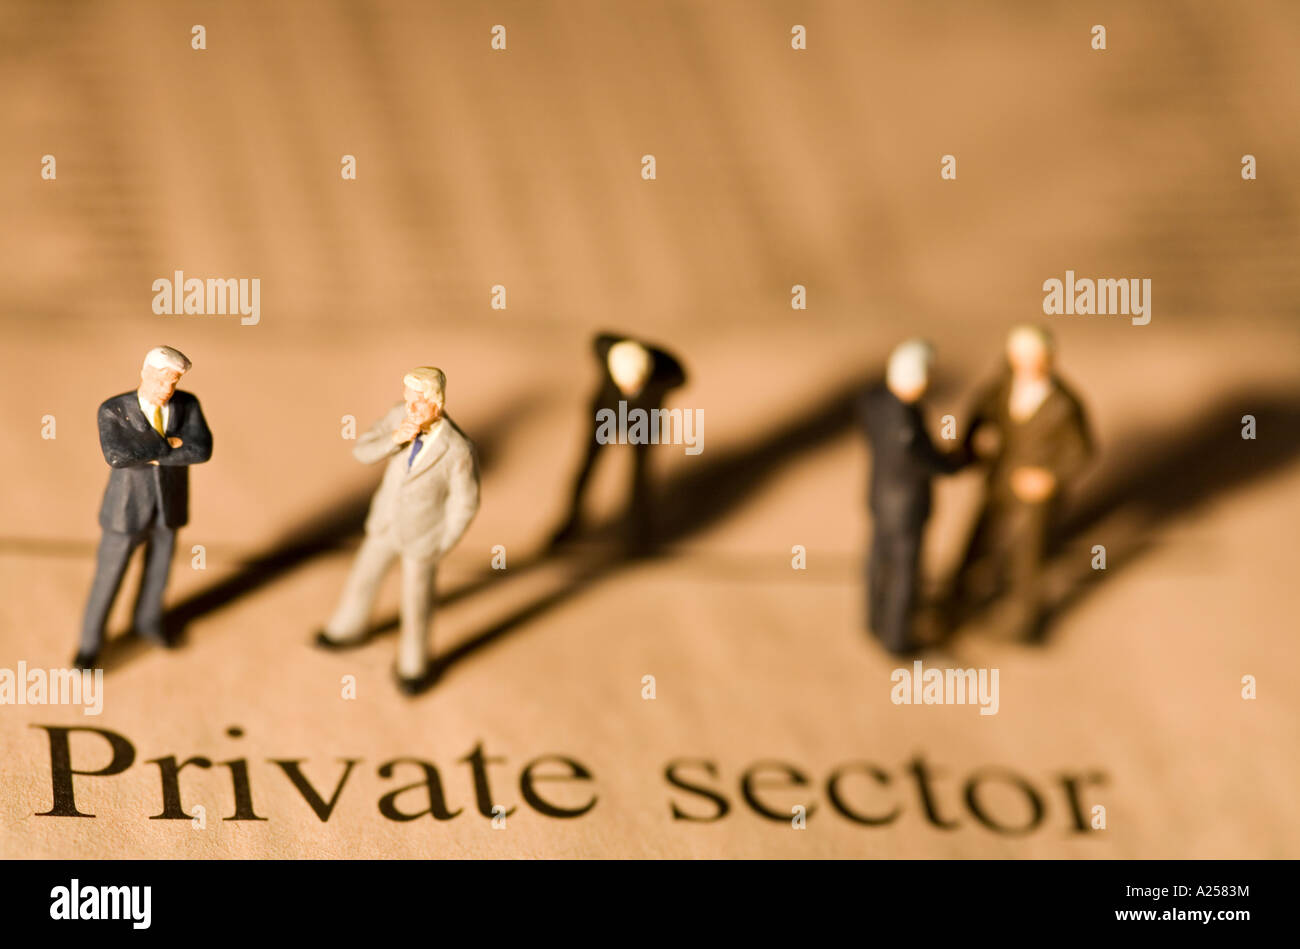 Miniature businessmen standing on financial newspaper in front of private sector headline Stock Photo